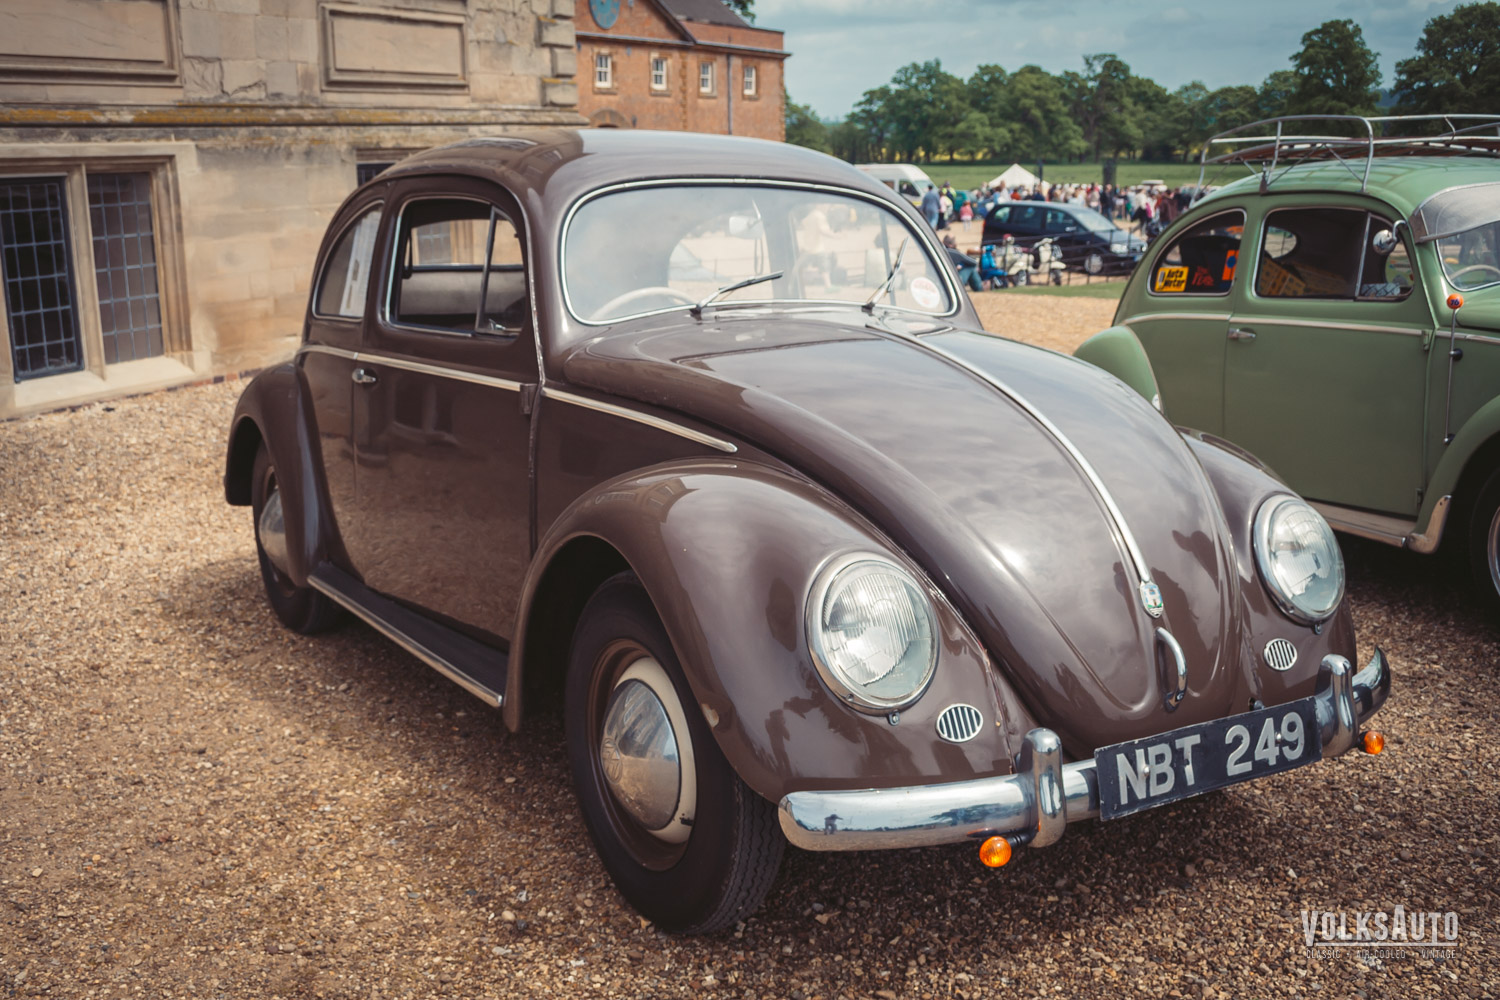 Oval Beetle at Stanford Hall 07